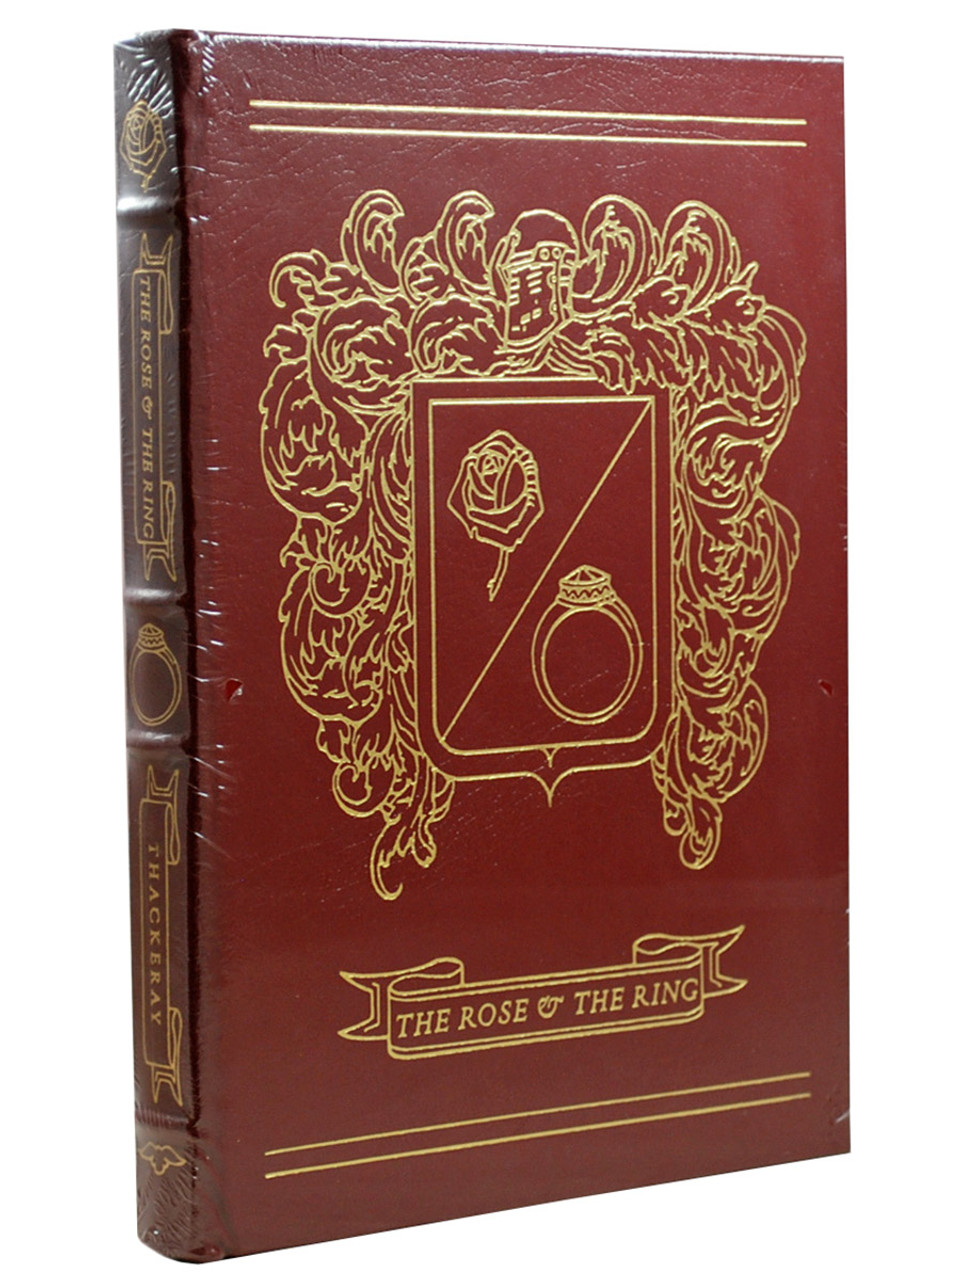 Easton Press "The Rose and the Ring" William Makepeace Thackeray, Leather Bound Collector's Edition [Sealed]